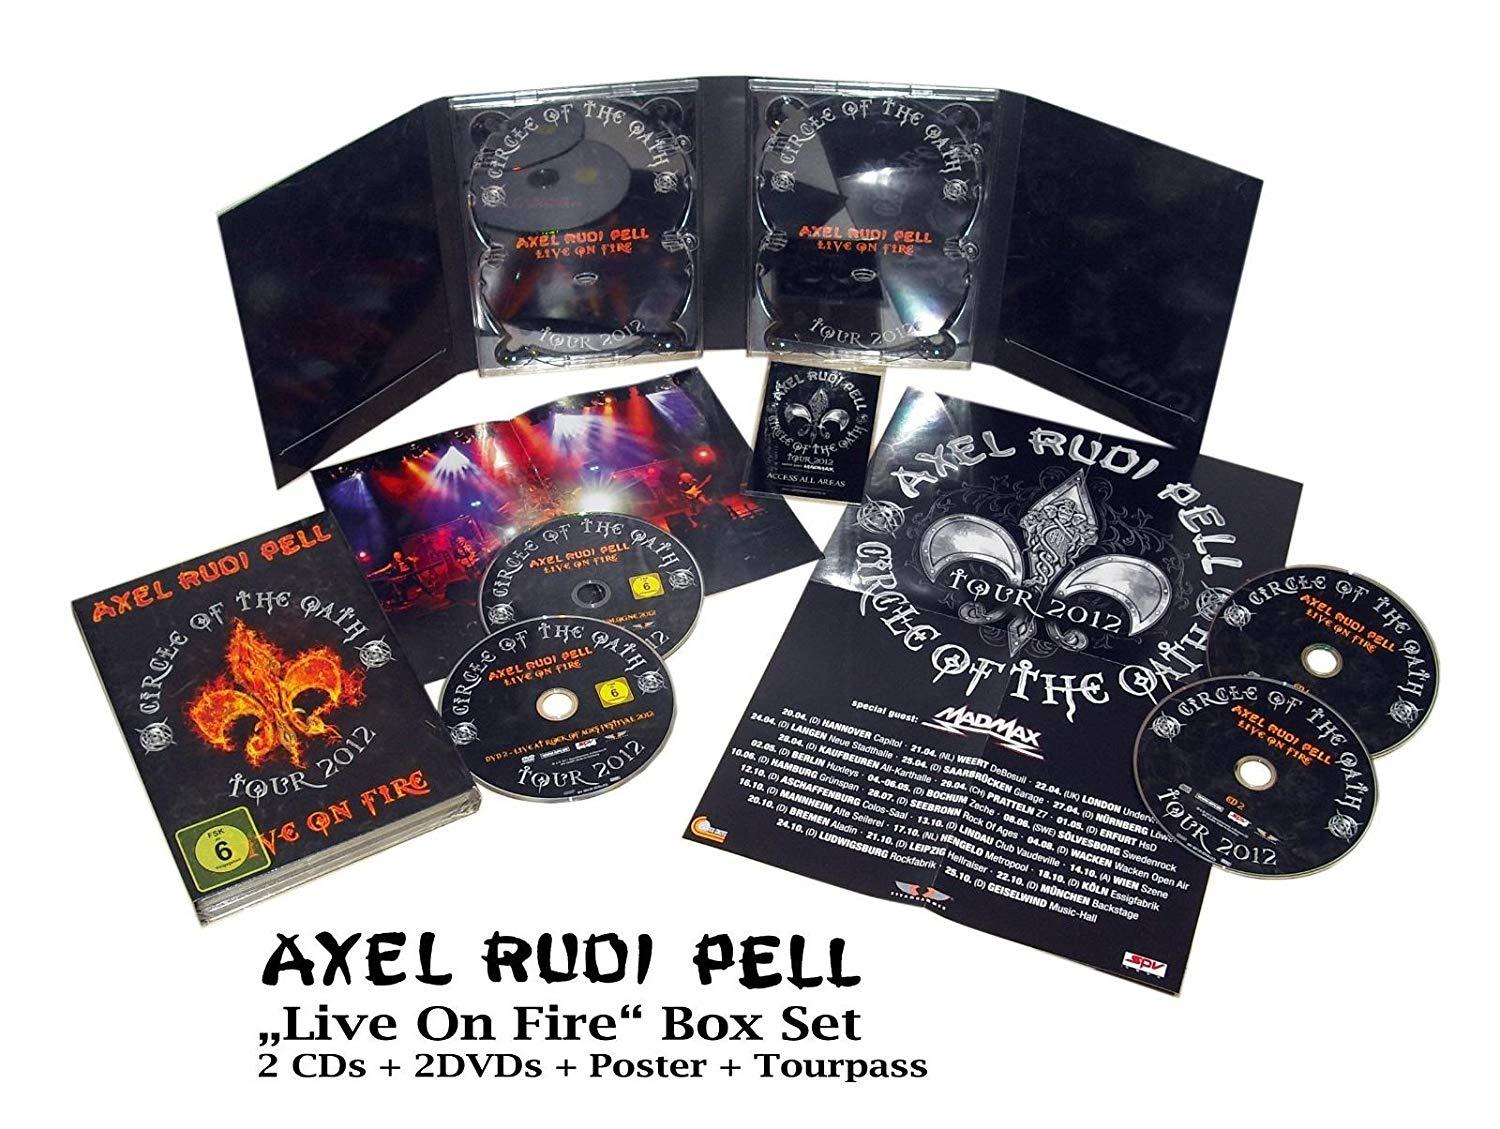 Pell, Axel Rudi - Live on Fire (Circle of the Oath Tour 2012) LTD. ED